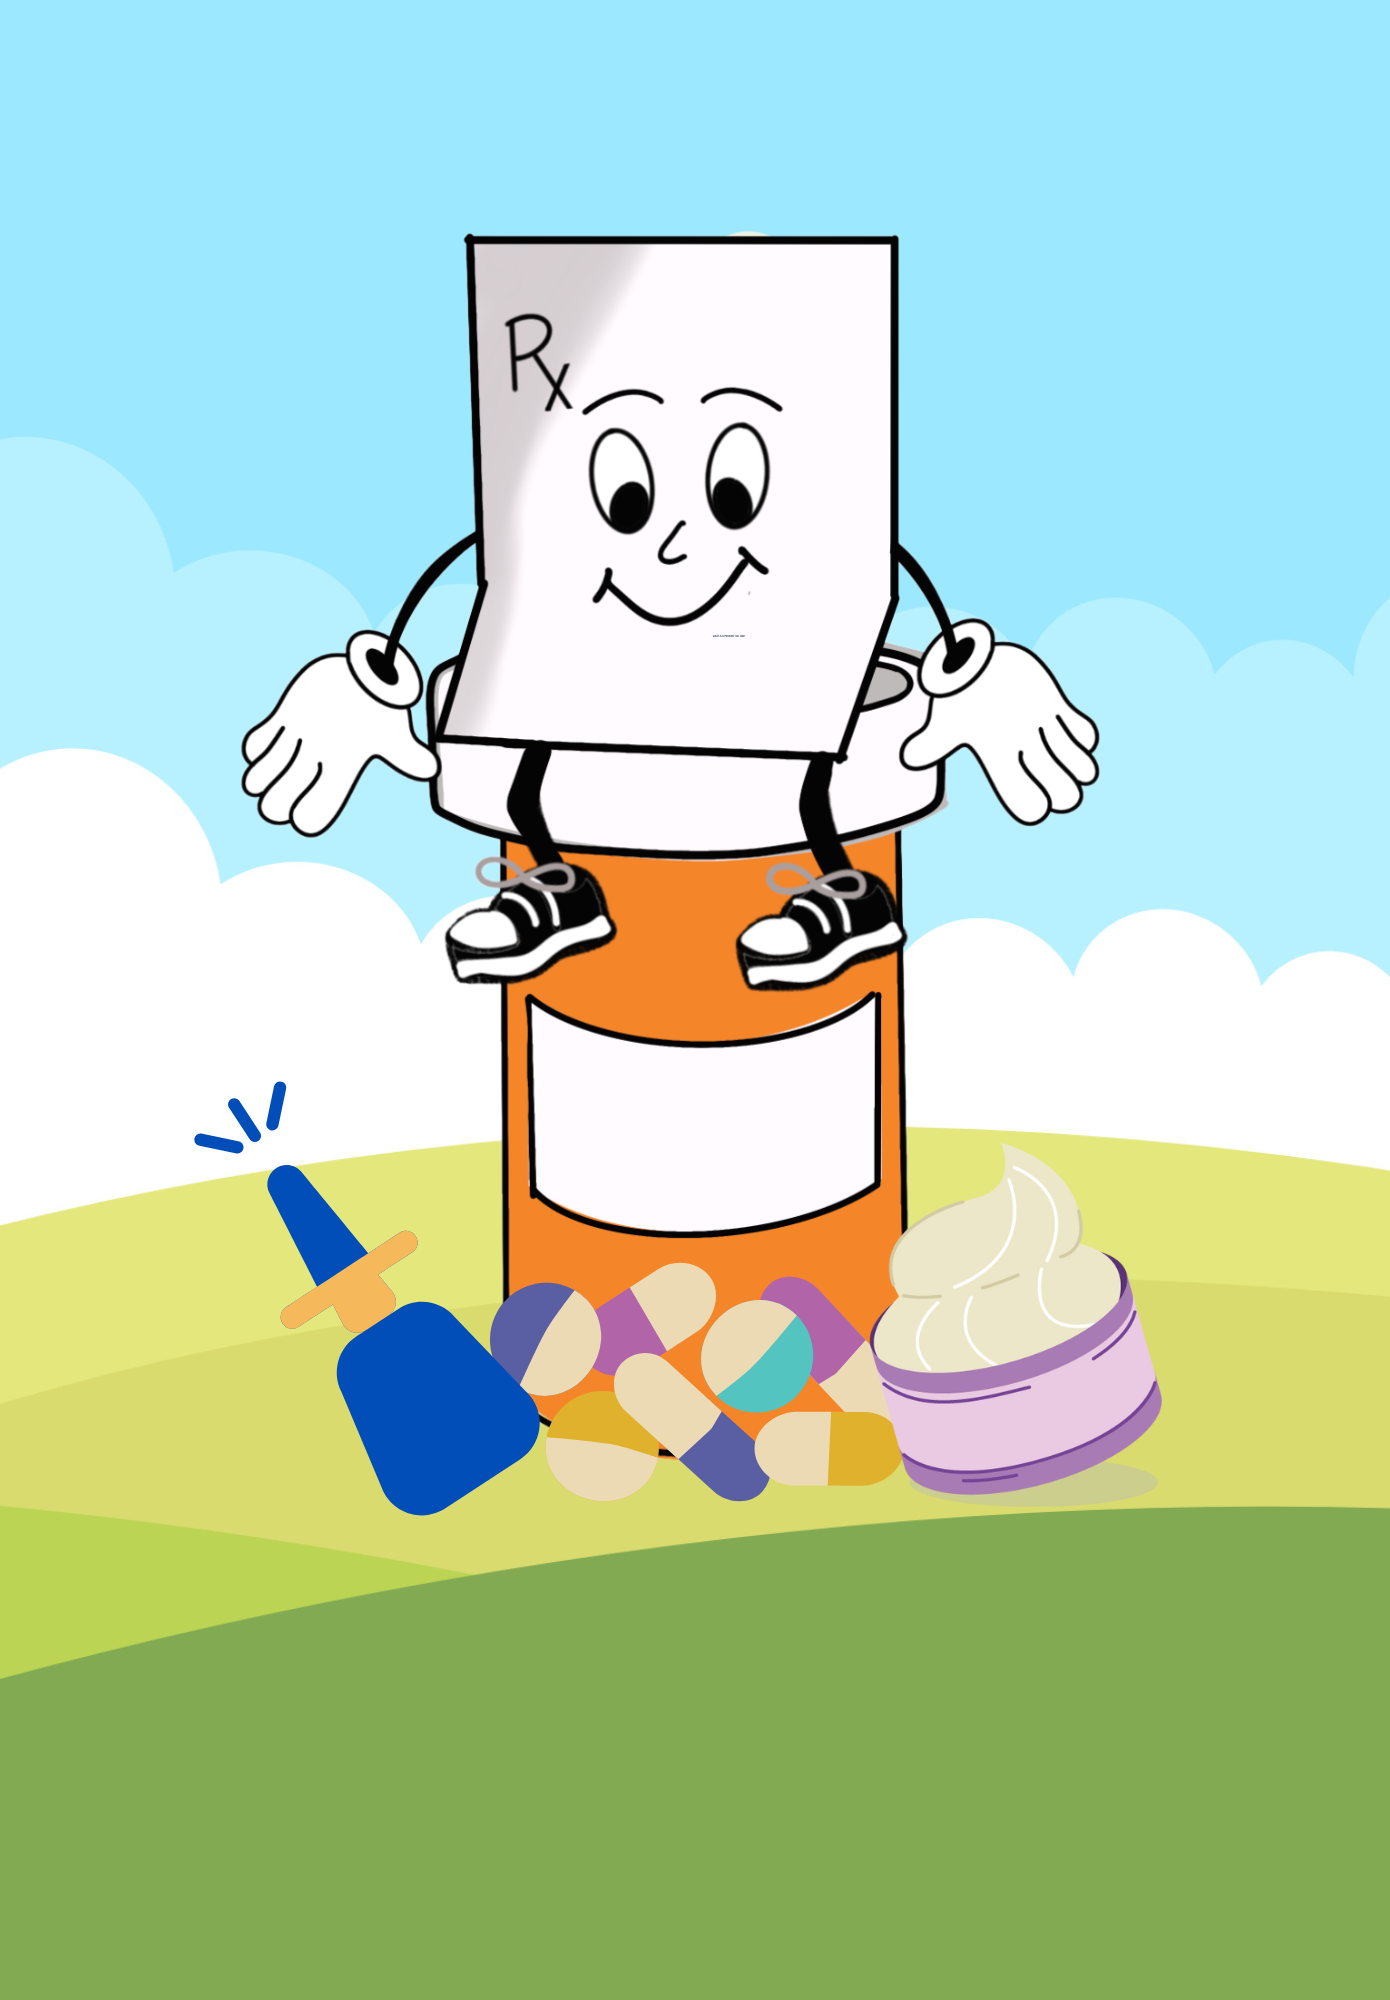 Illustration of an animated RX script sitting on top of a pill bottle on a hill